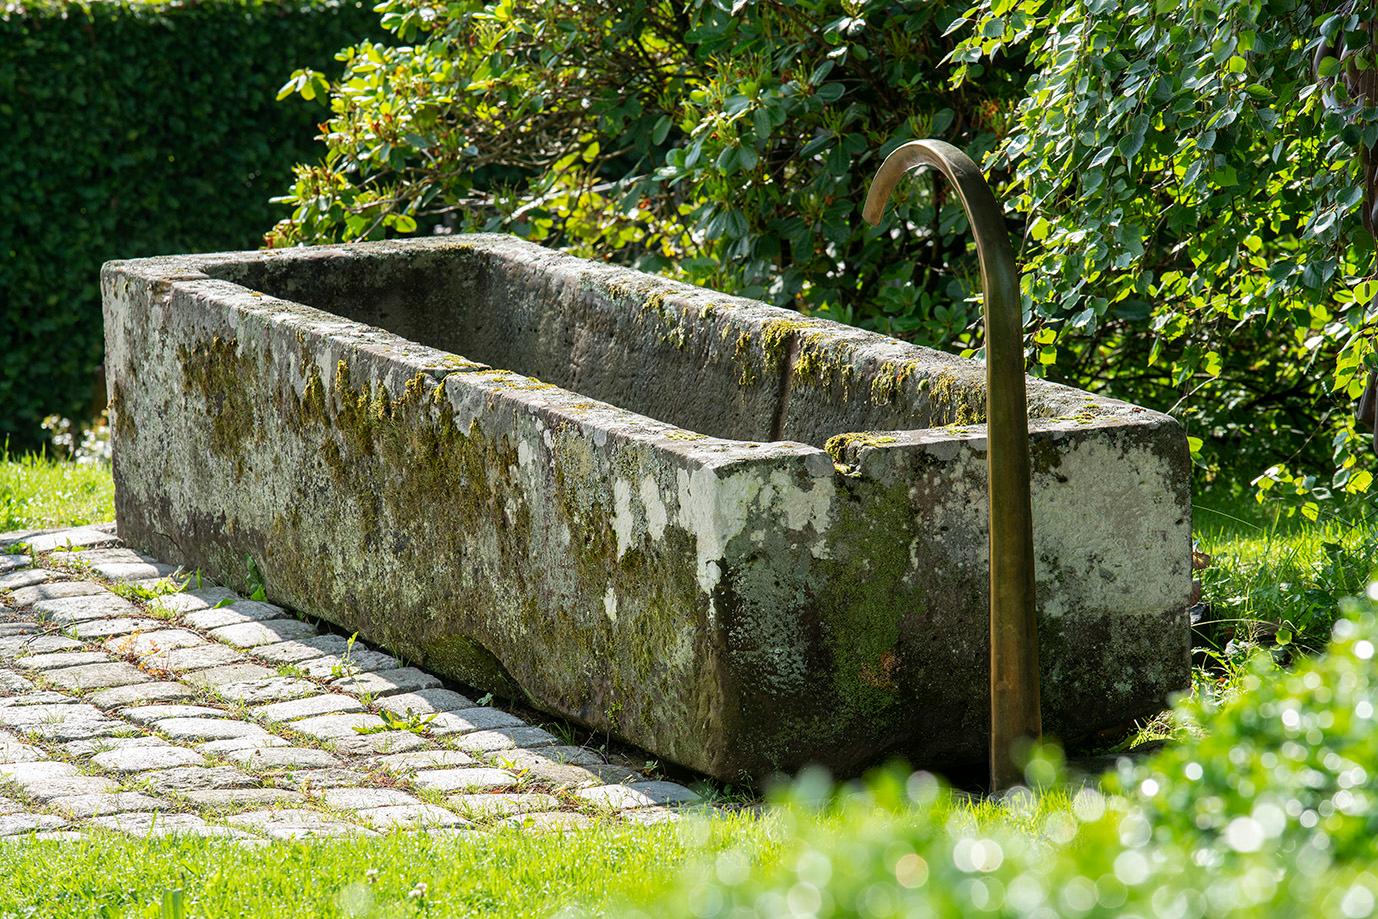 On these pictures you can see an antique fountain with a beautiful patina.
The fountain is 310cm x 90cm x 60cm
Pictured spout is out of brass can be designed as desired.
The fountain is ready to use and beautiful not just in beauty but quality as